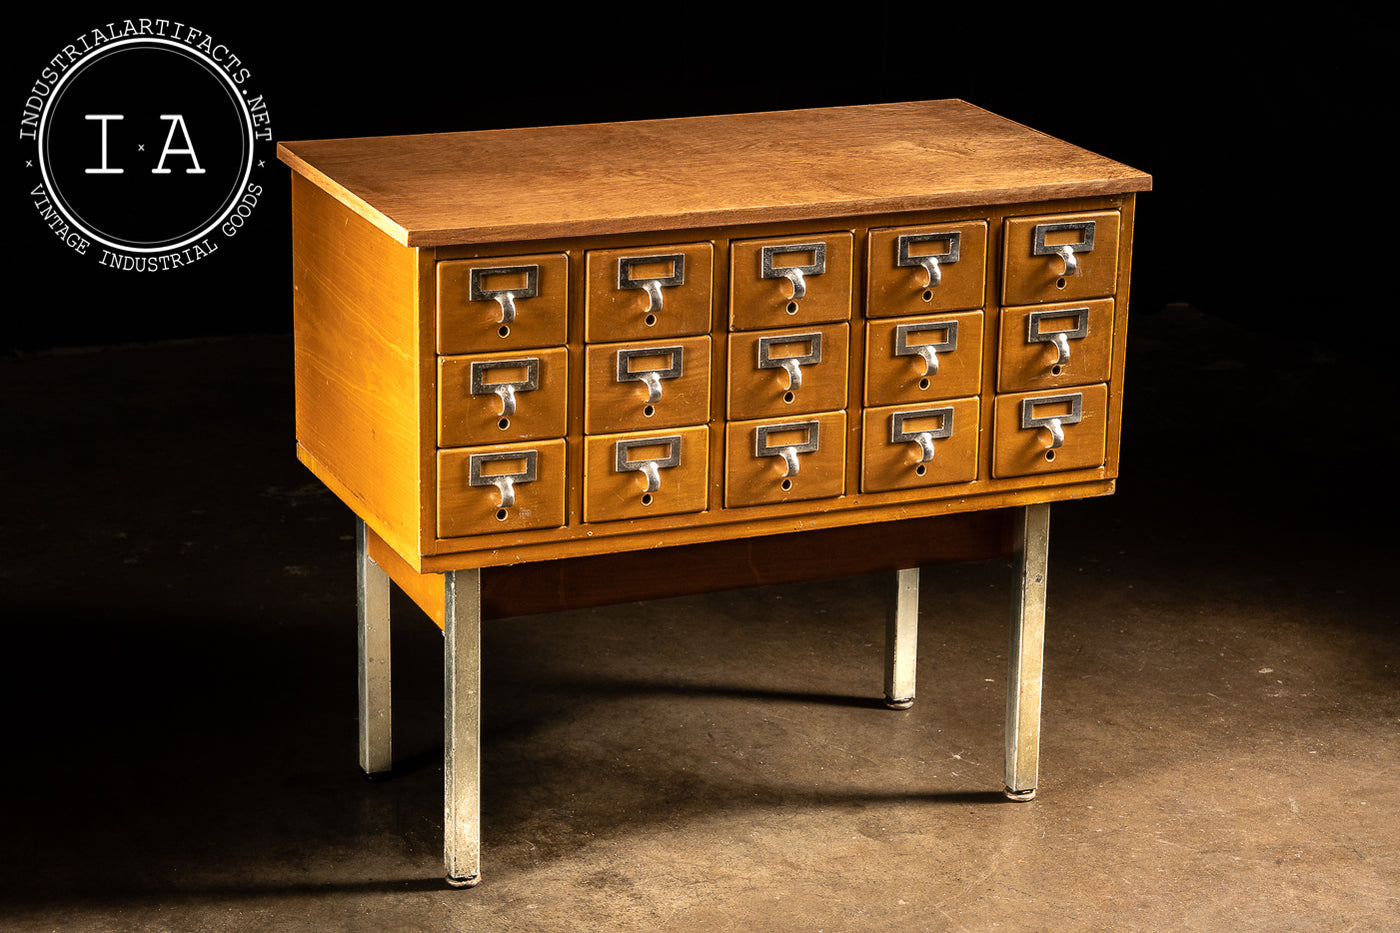 c. 1960 Card Catalog With Fifteen Drawers